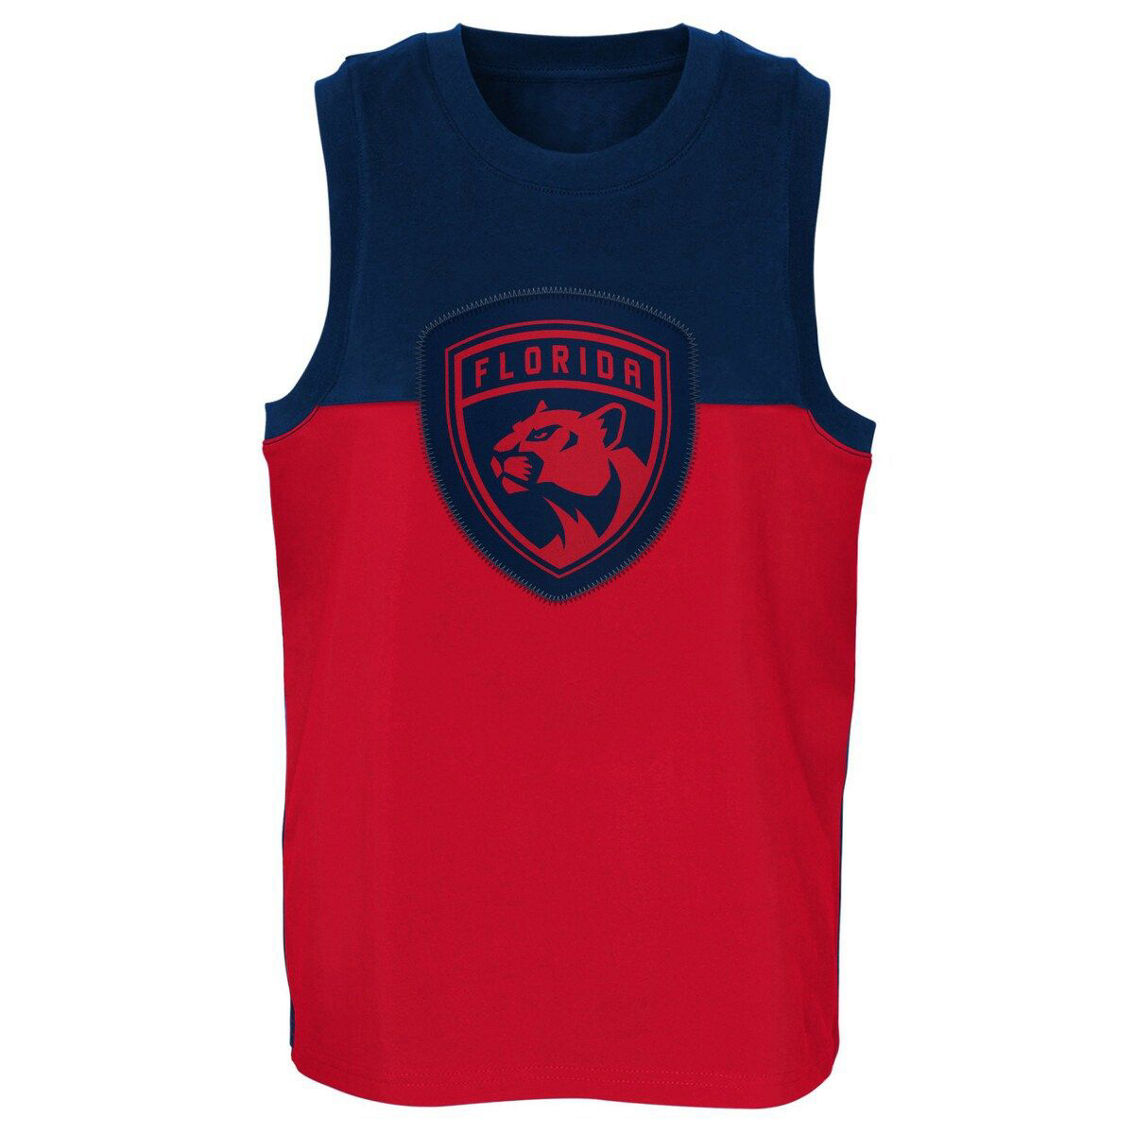 Outerstuff Youth Red/Navy Florida Panthers Revitalize Tank Top - Image 3 of 4